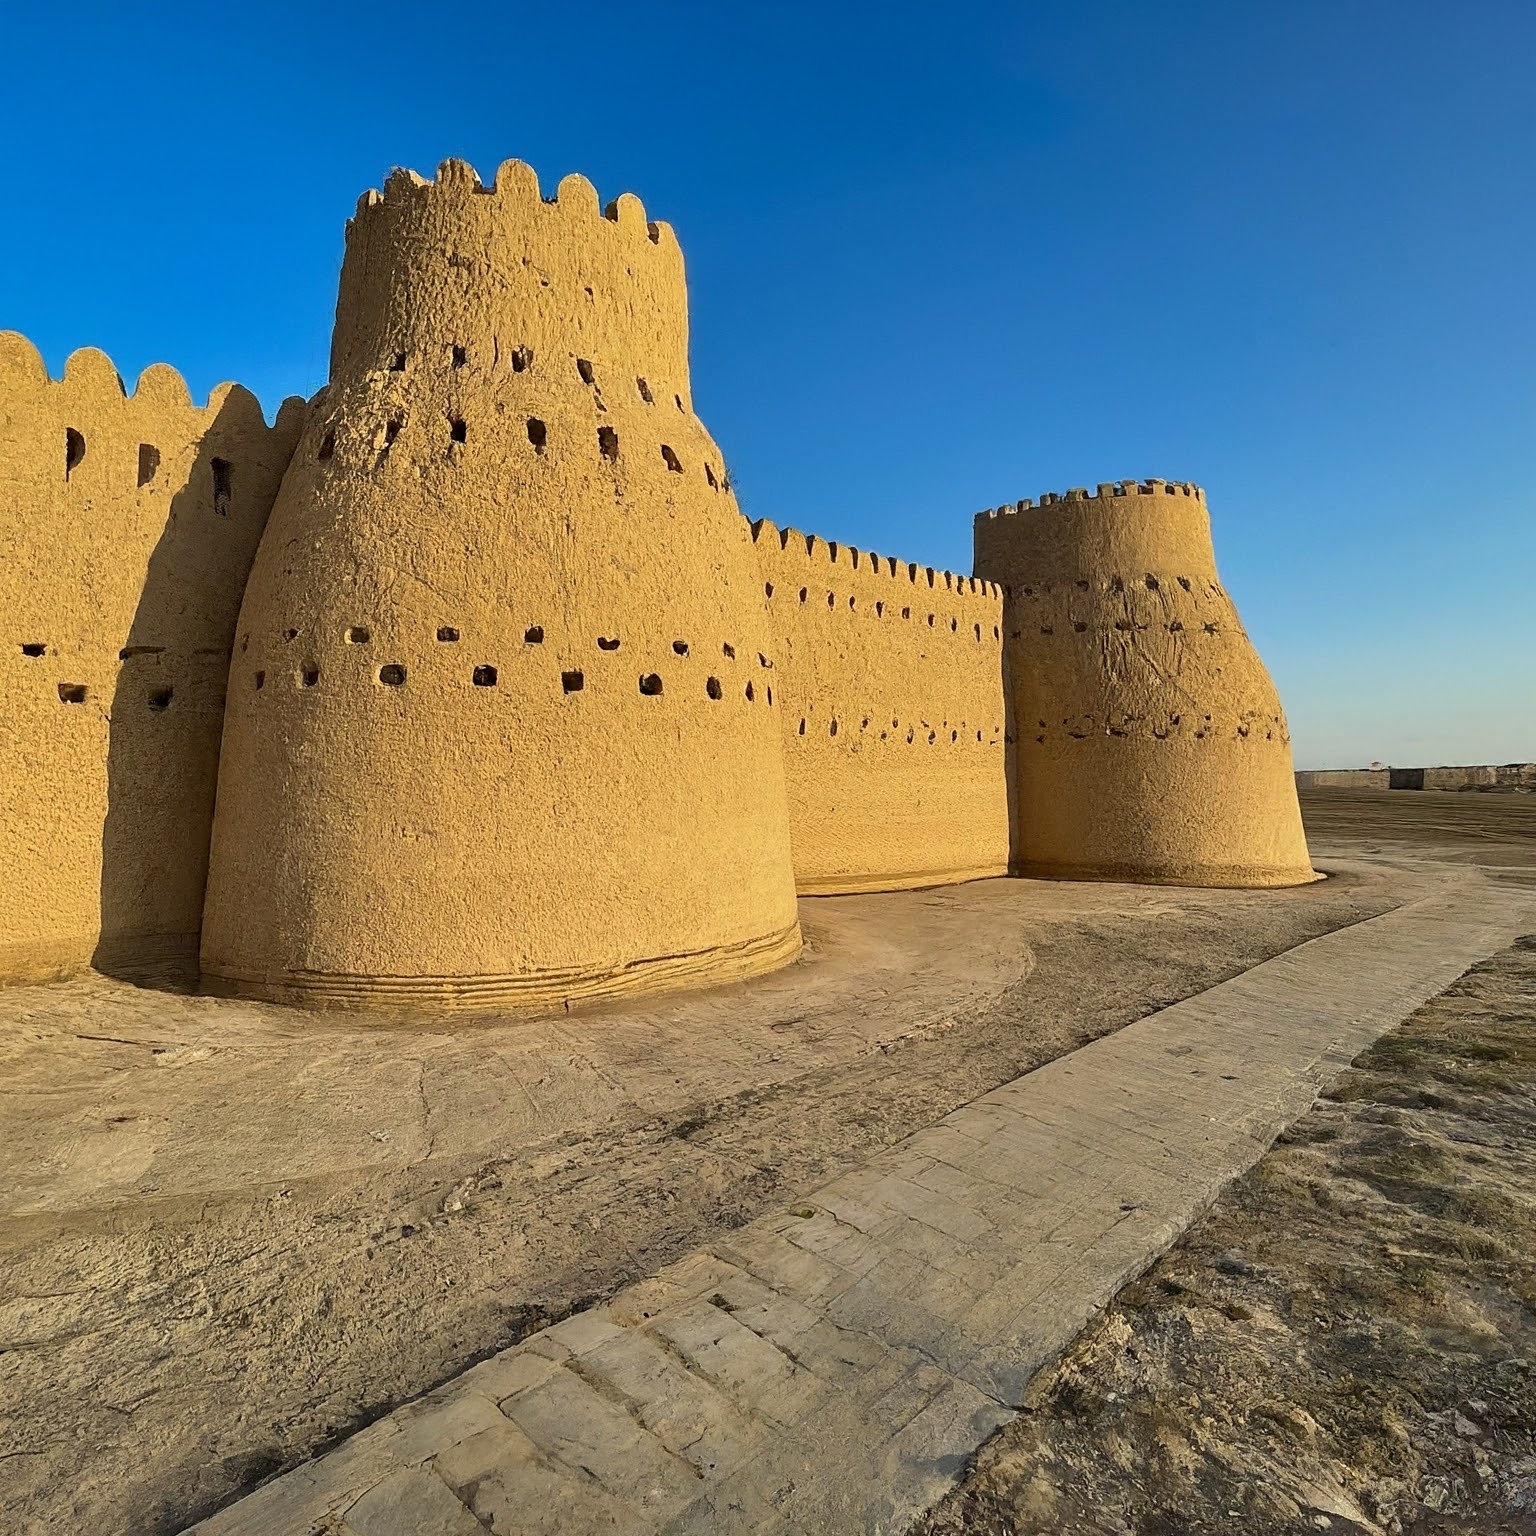 Sarakhs Fortress in Turkmenistan, a UNESCO World Heritage Site, with mudbrick walls and towers.